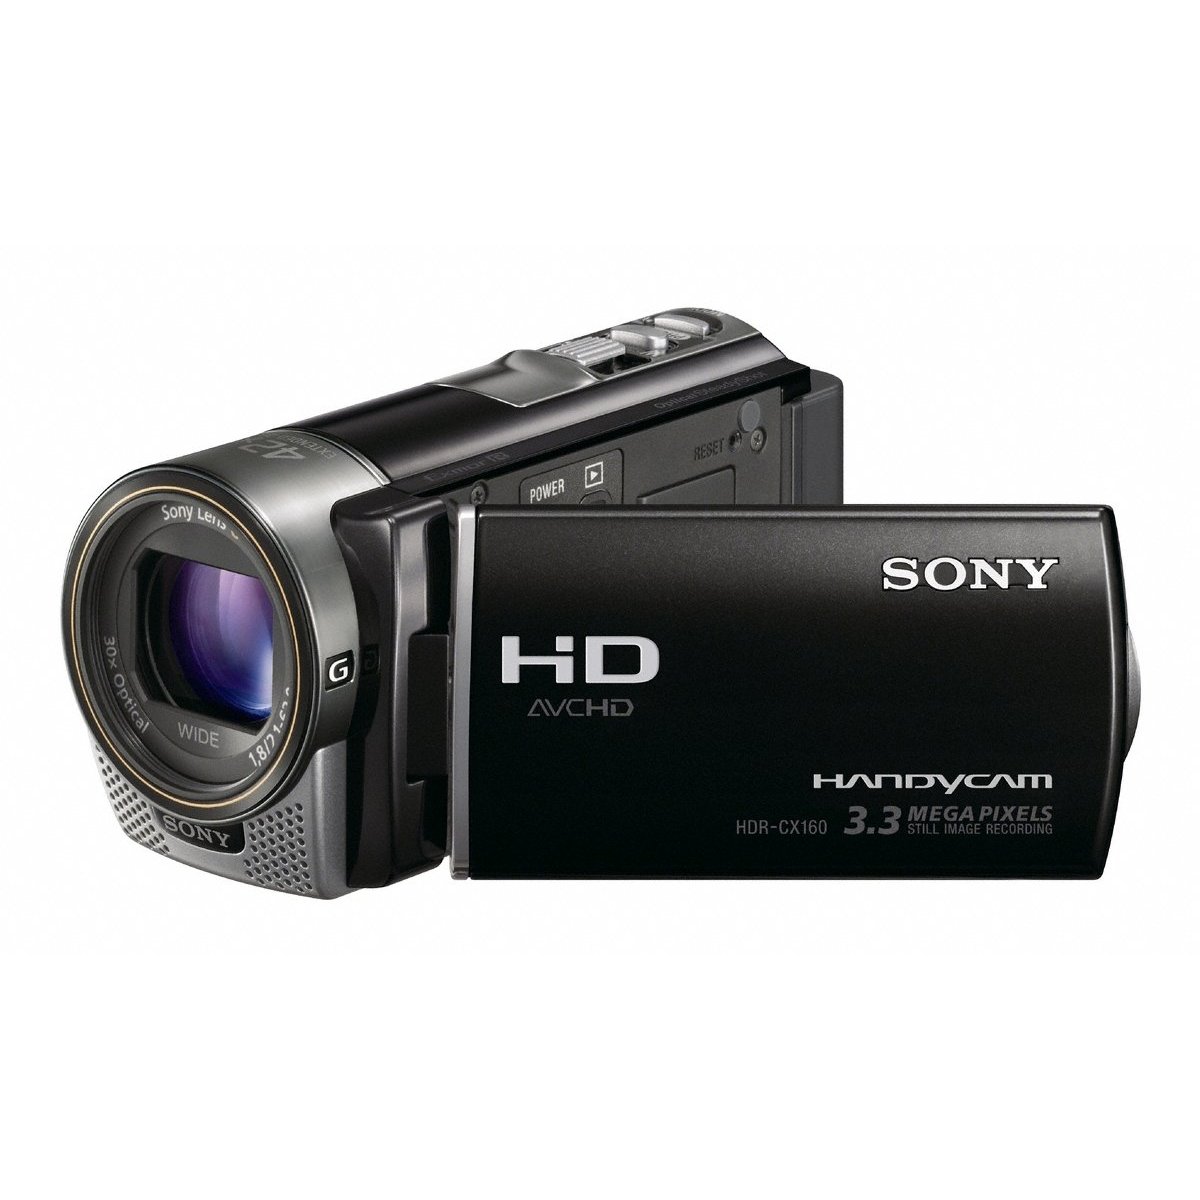 http://thetechjournal.com/wp-content/uploads/images/1110/1319908828-sony-hdrcx160-highdefinition-handycam-camcorder--1.jpg